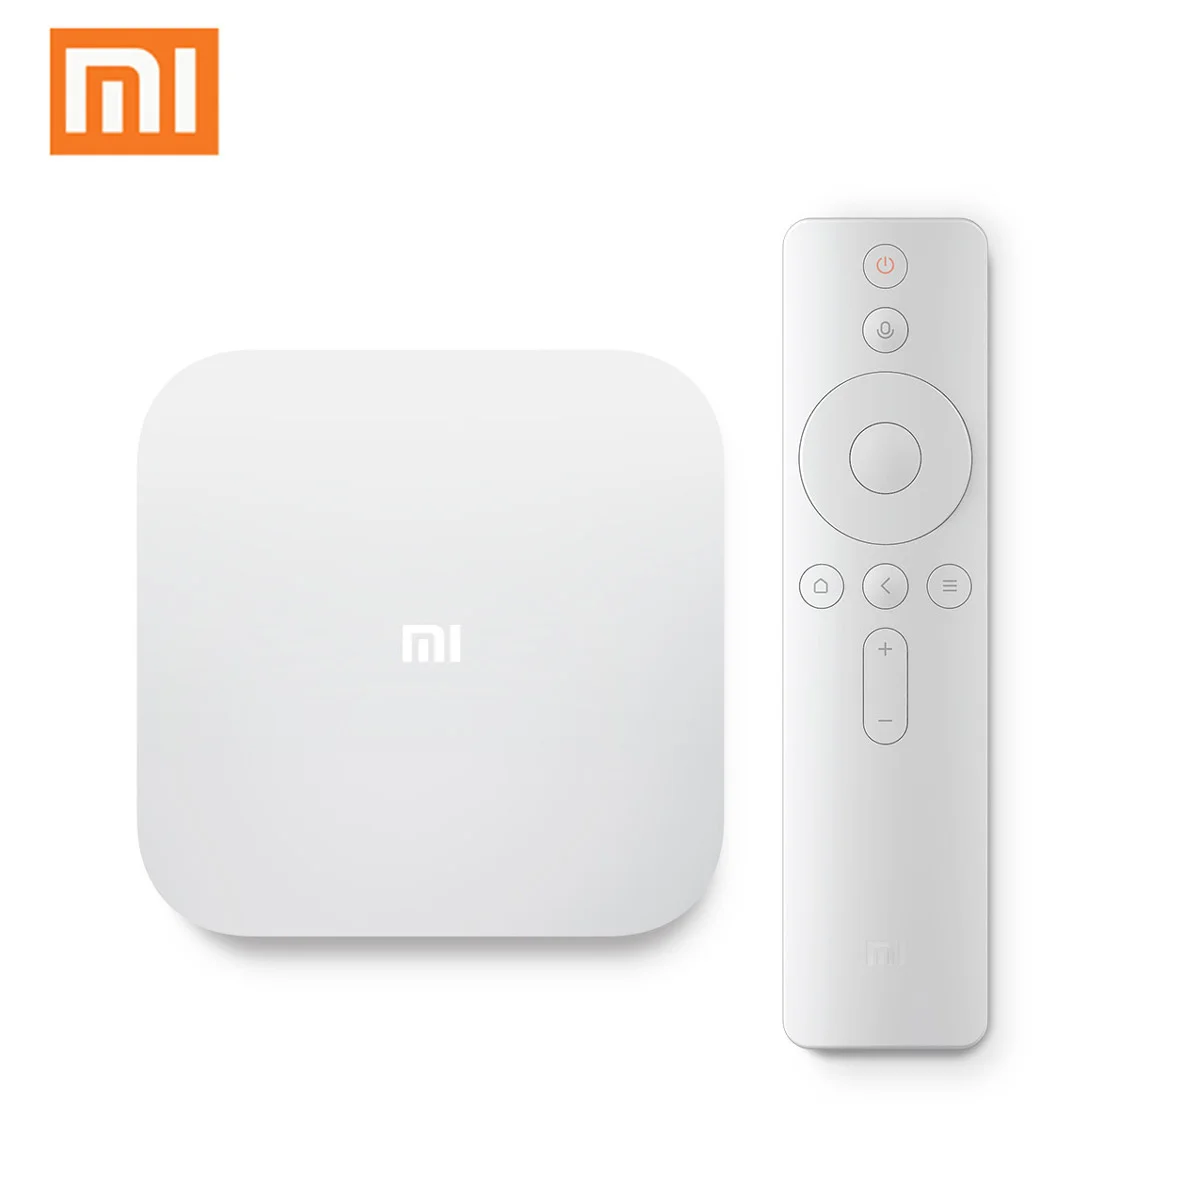 Xiaomi Tv Box4 1.9Ghz Amlogic Quad-Core 5G Wifi Bluetooth Android 4K Hdr Smart Streaming Media Player Chinese Version